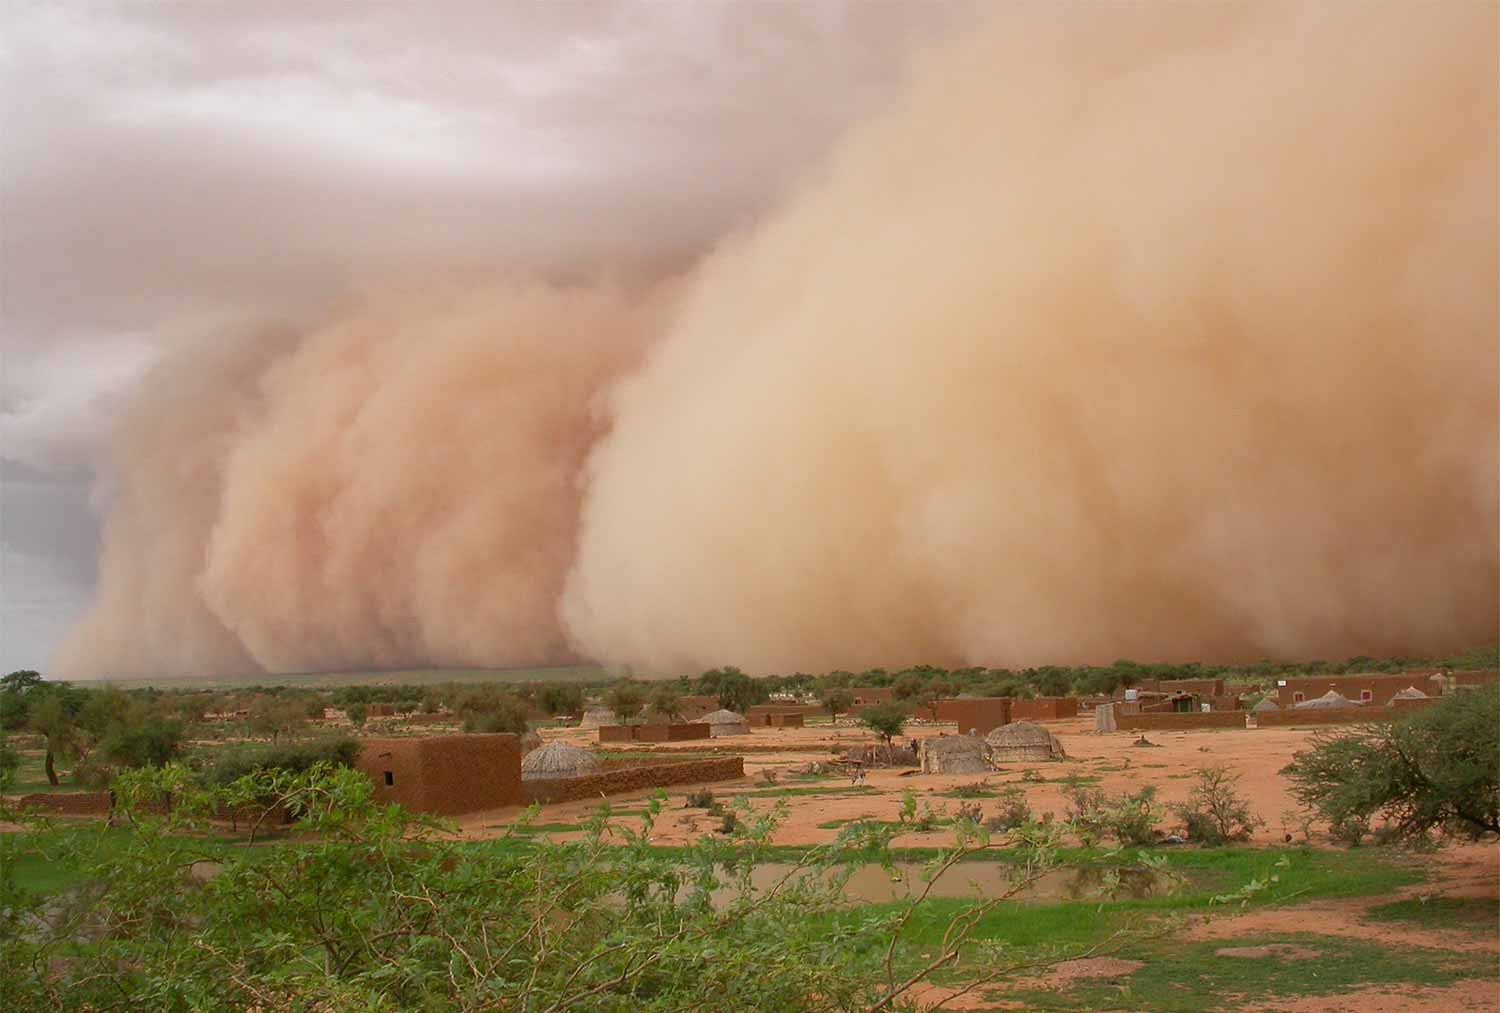 Image: Arrival of a wall of dust known as a haboob